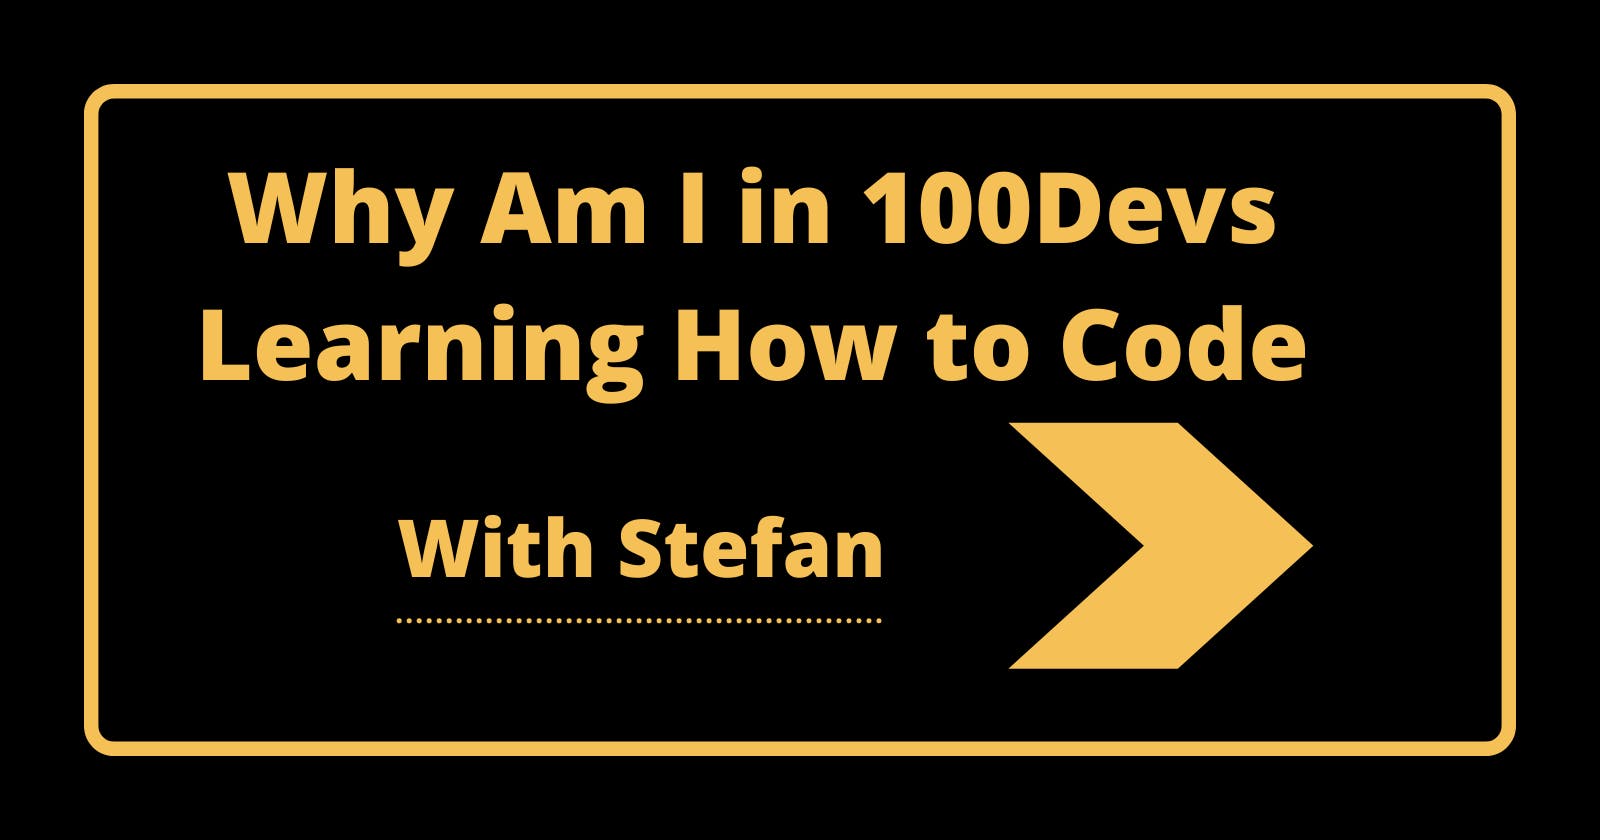 Why Am I in 100Devs Learning How to Code?